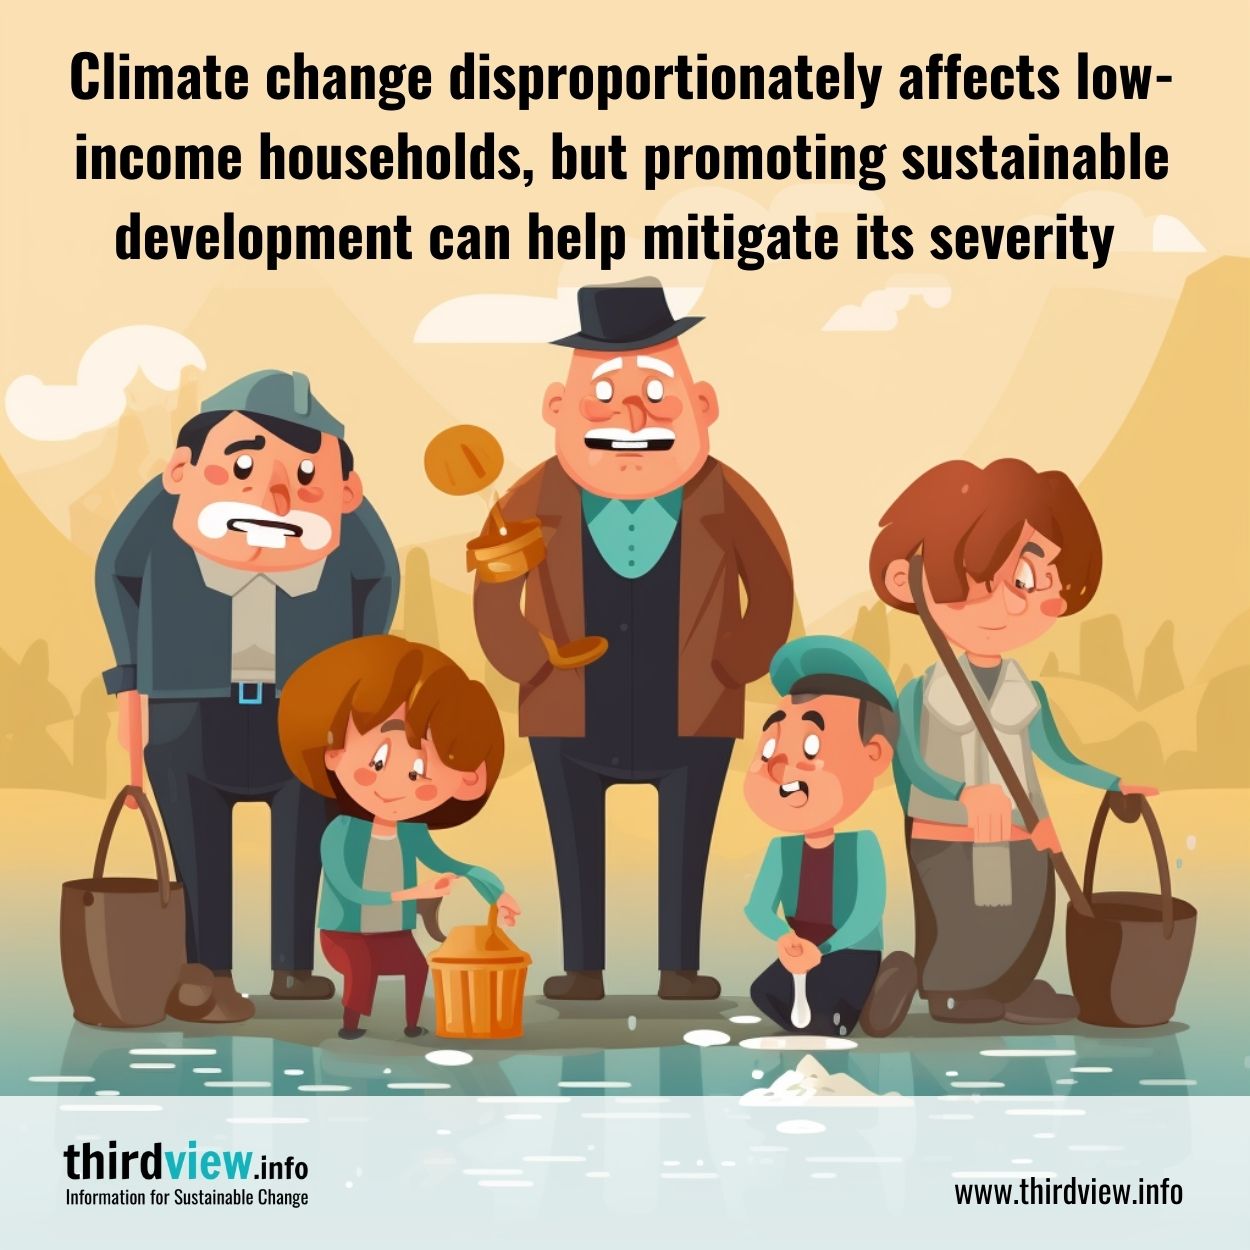 Climate change disproportionately affects low-income households, but promoting sustainable development can help mitigate its severity